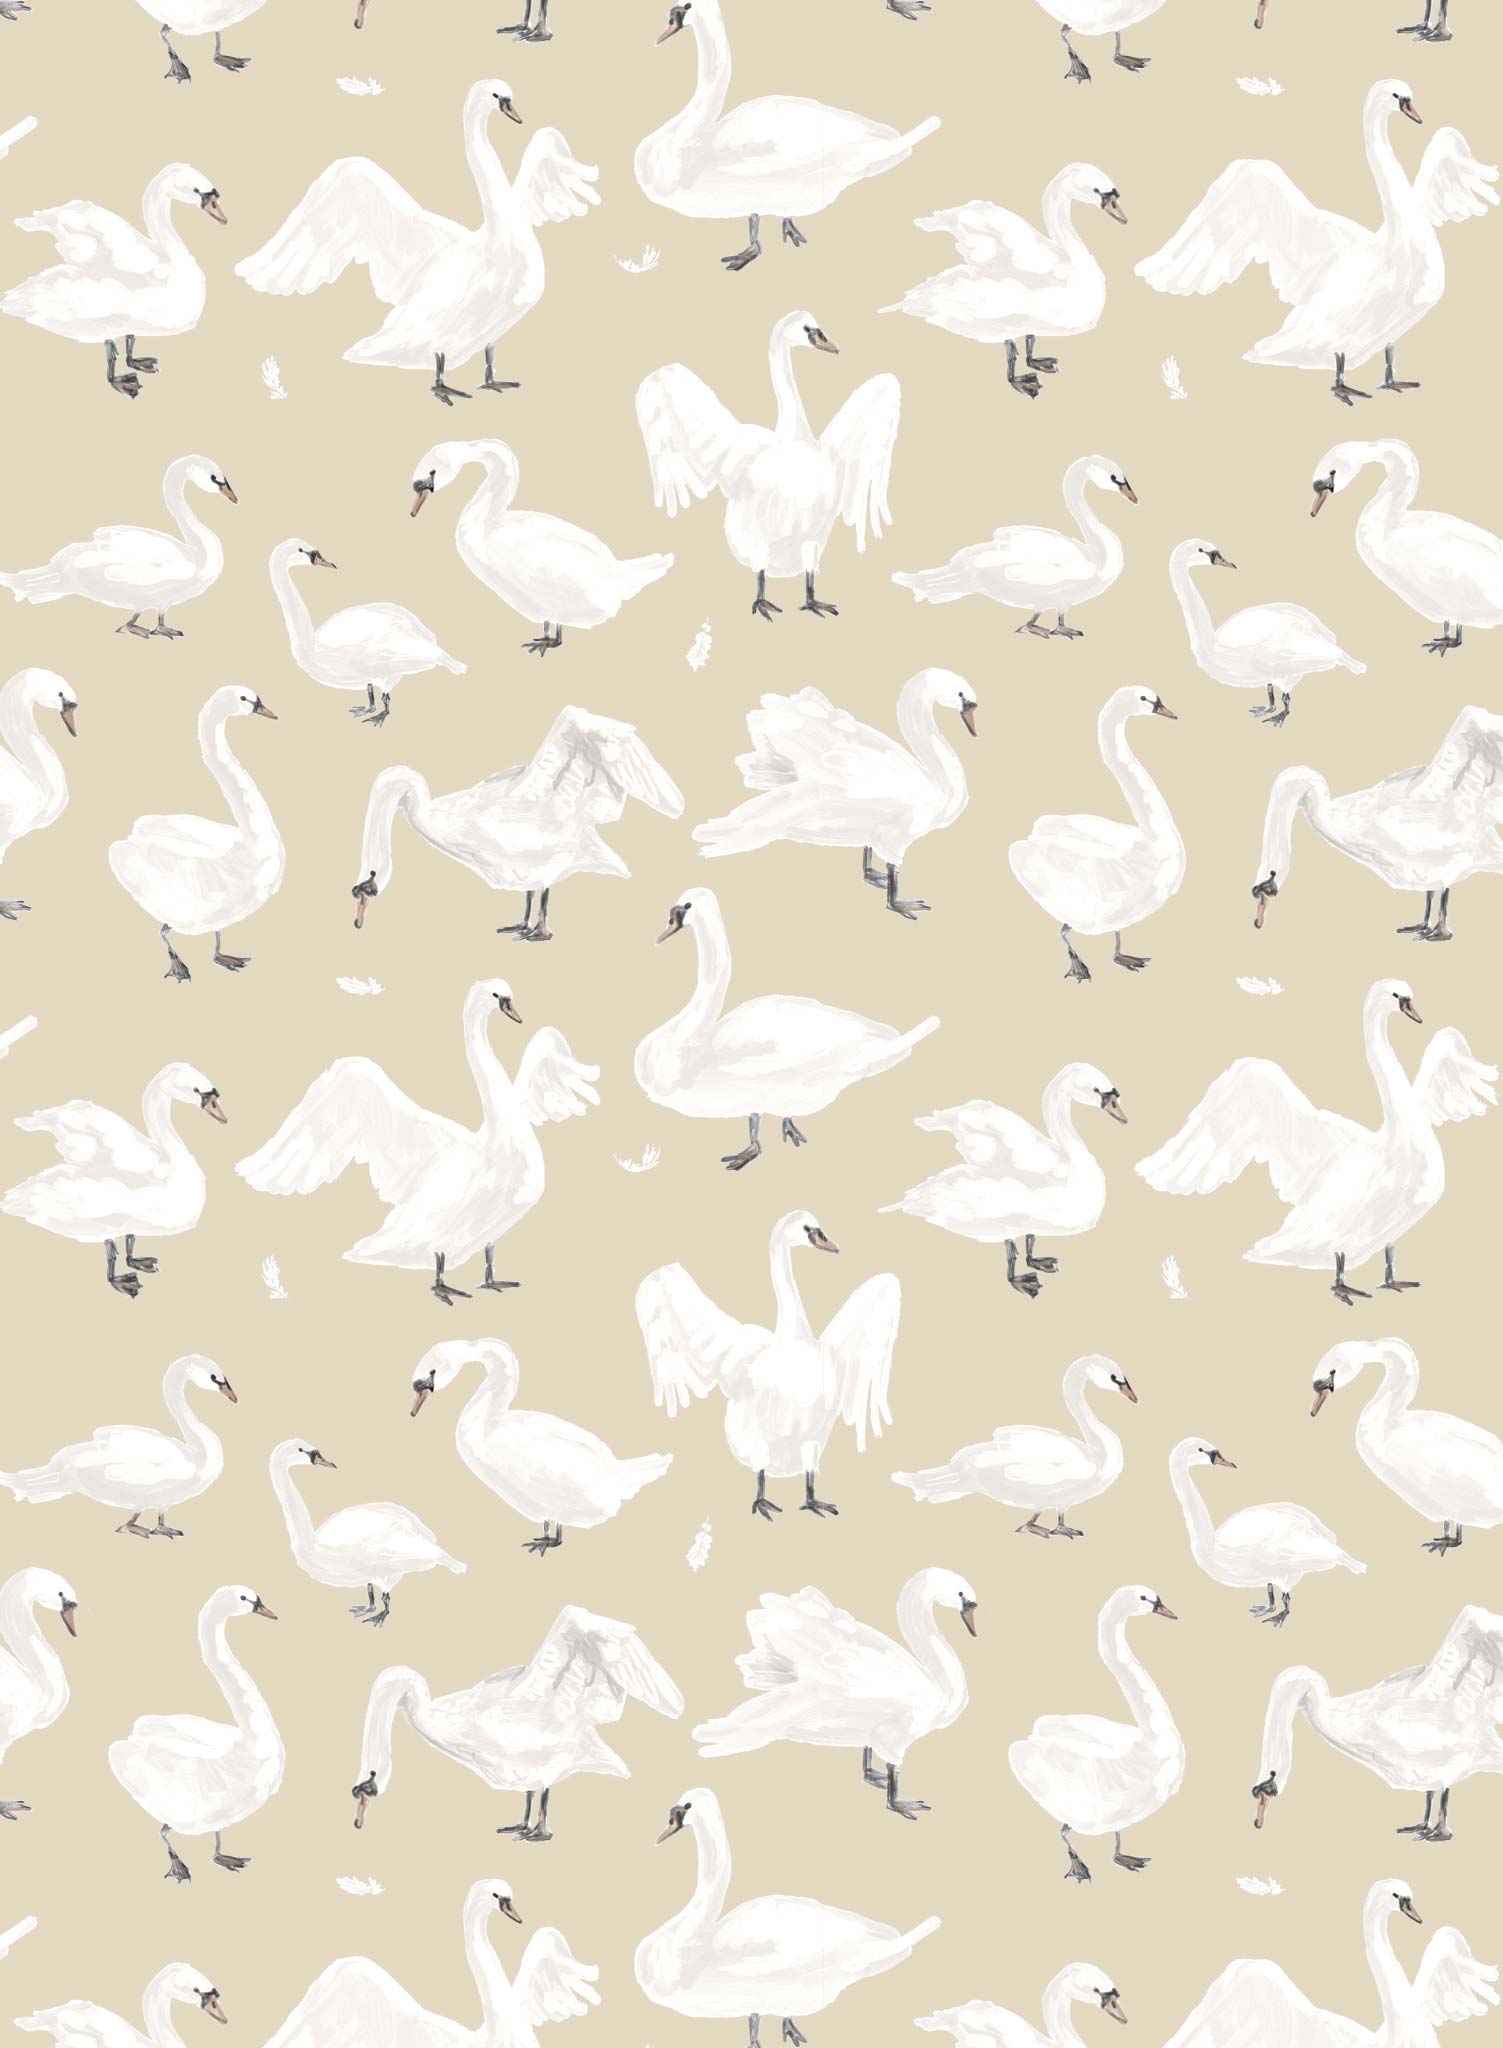 Mother Goose is a Minimalist wallpaper by Opposite Wall of gooses floating around.